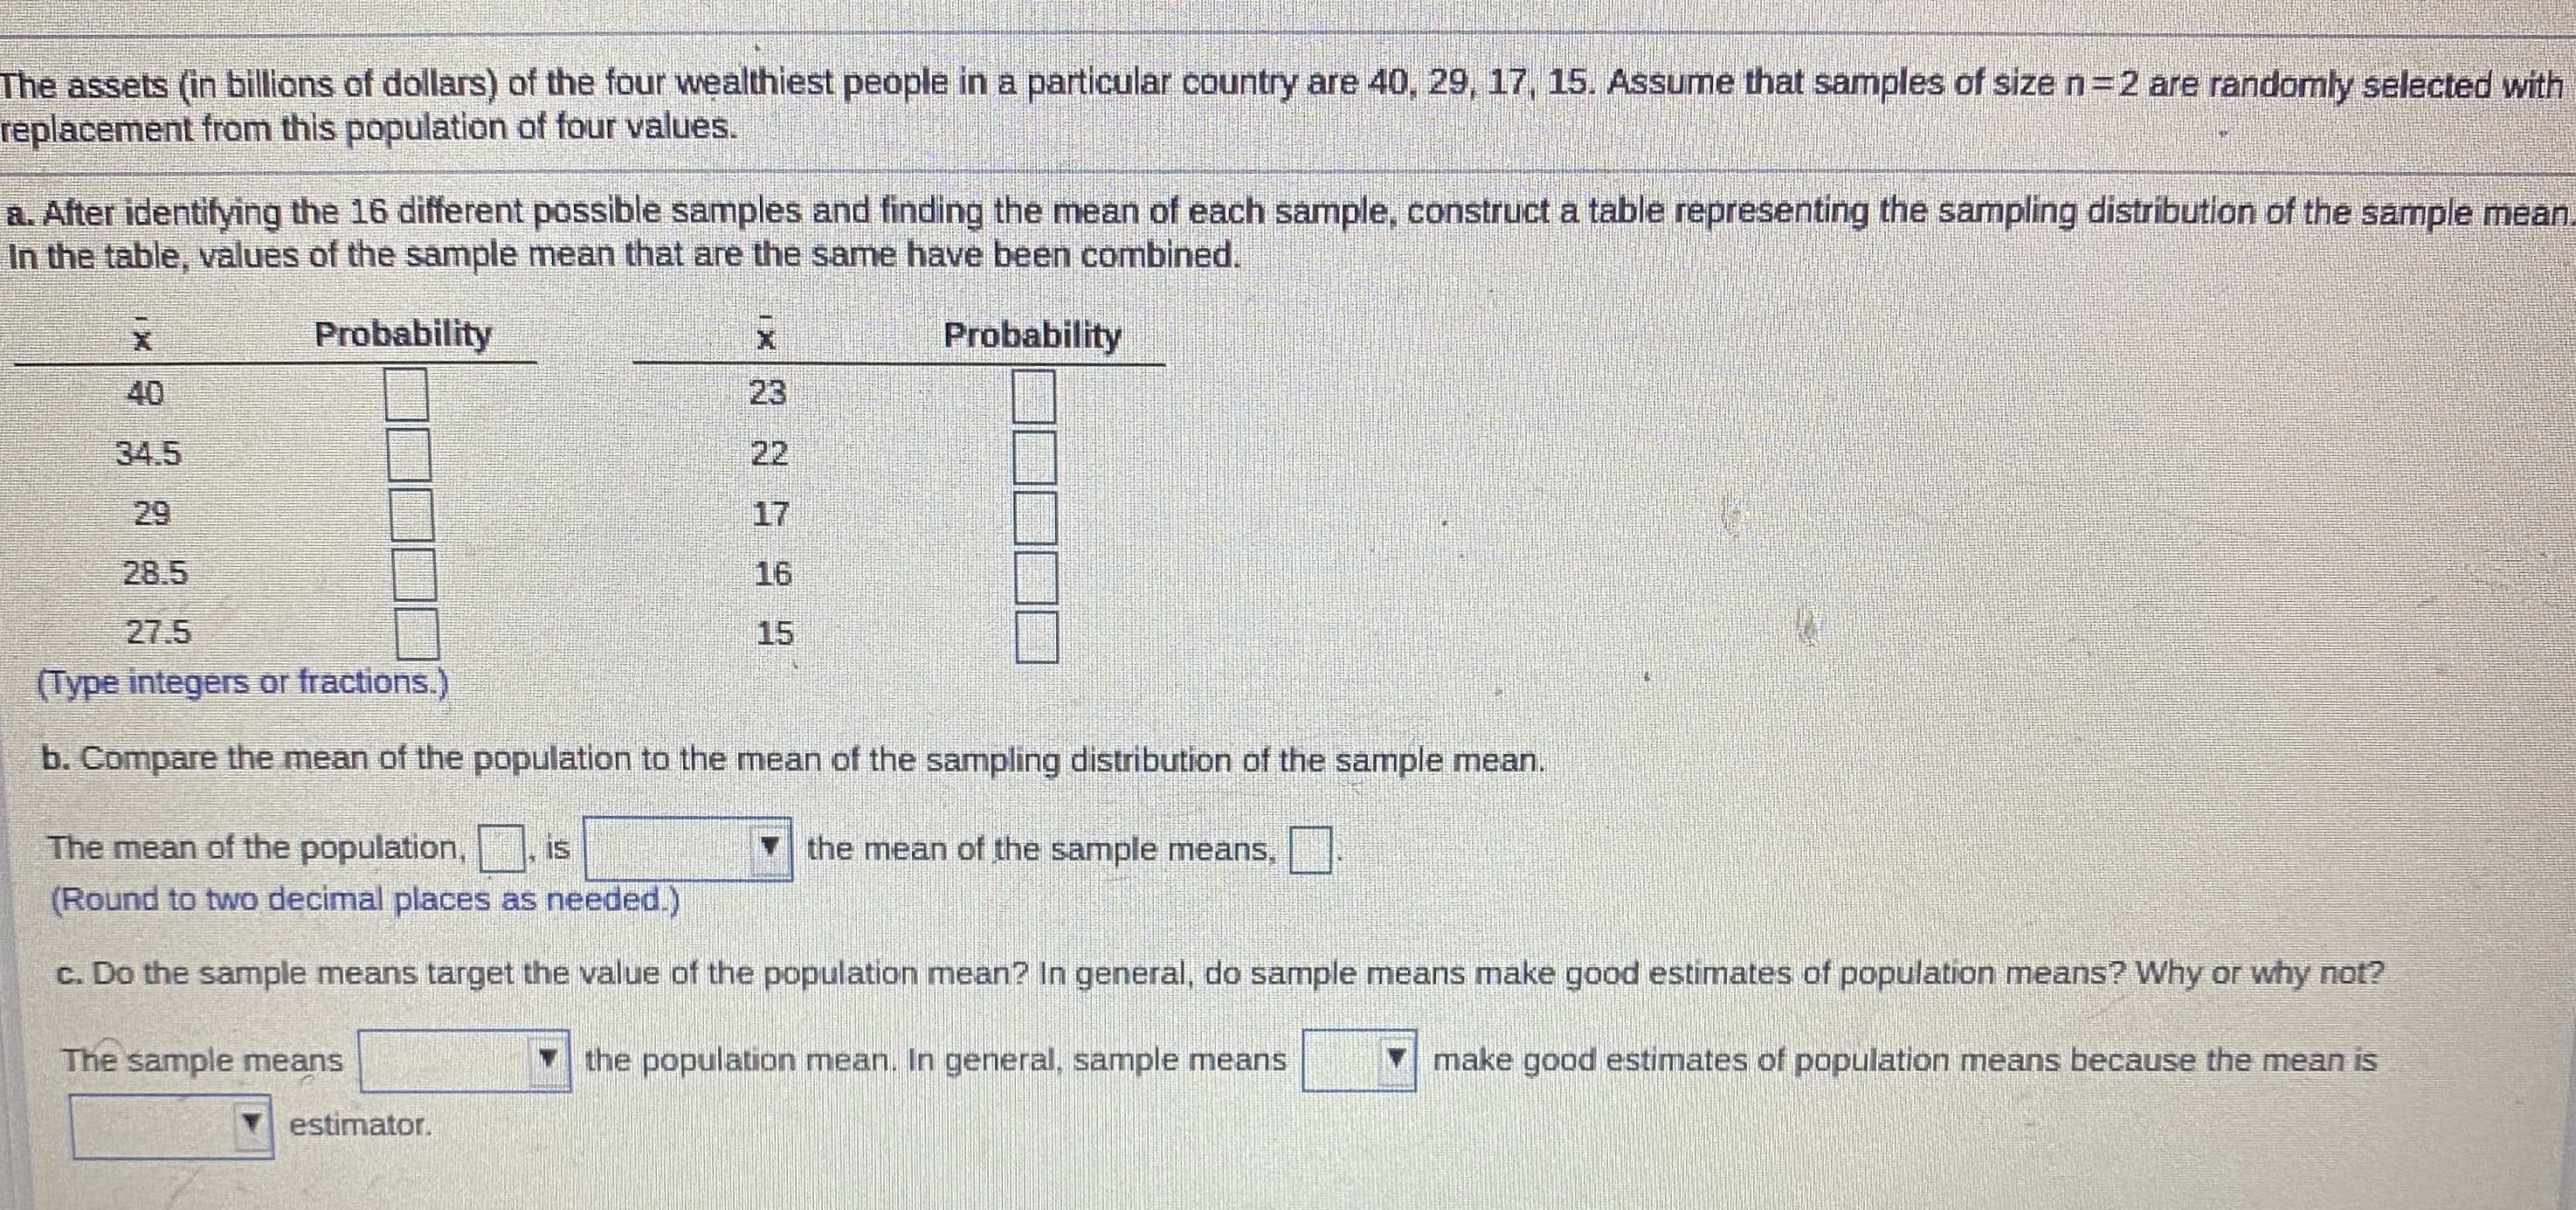 The assets (in billions of dollars) of the four wealthiest people in a particular country are 40, 29, 17, 15. Assume that samples of size n=2 are randomly selected with
replacement from this population of four values.
a. After identifying the 16 different possible samples and finding the mean of each sample, construct a table representing the sampling distribution of the sample mear
In the table, values of the sample mean that are the same have been combined.
